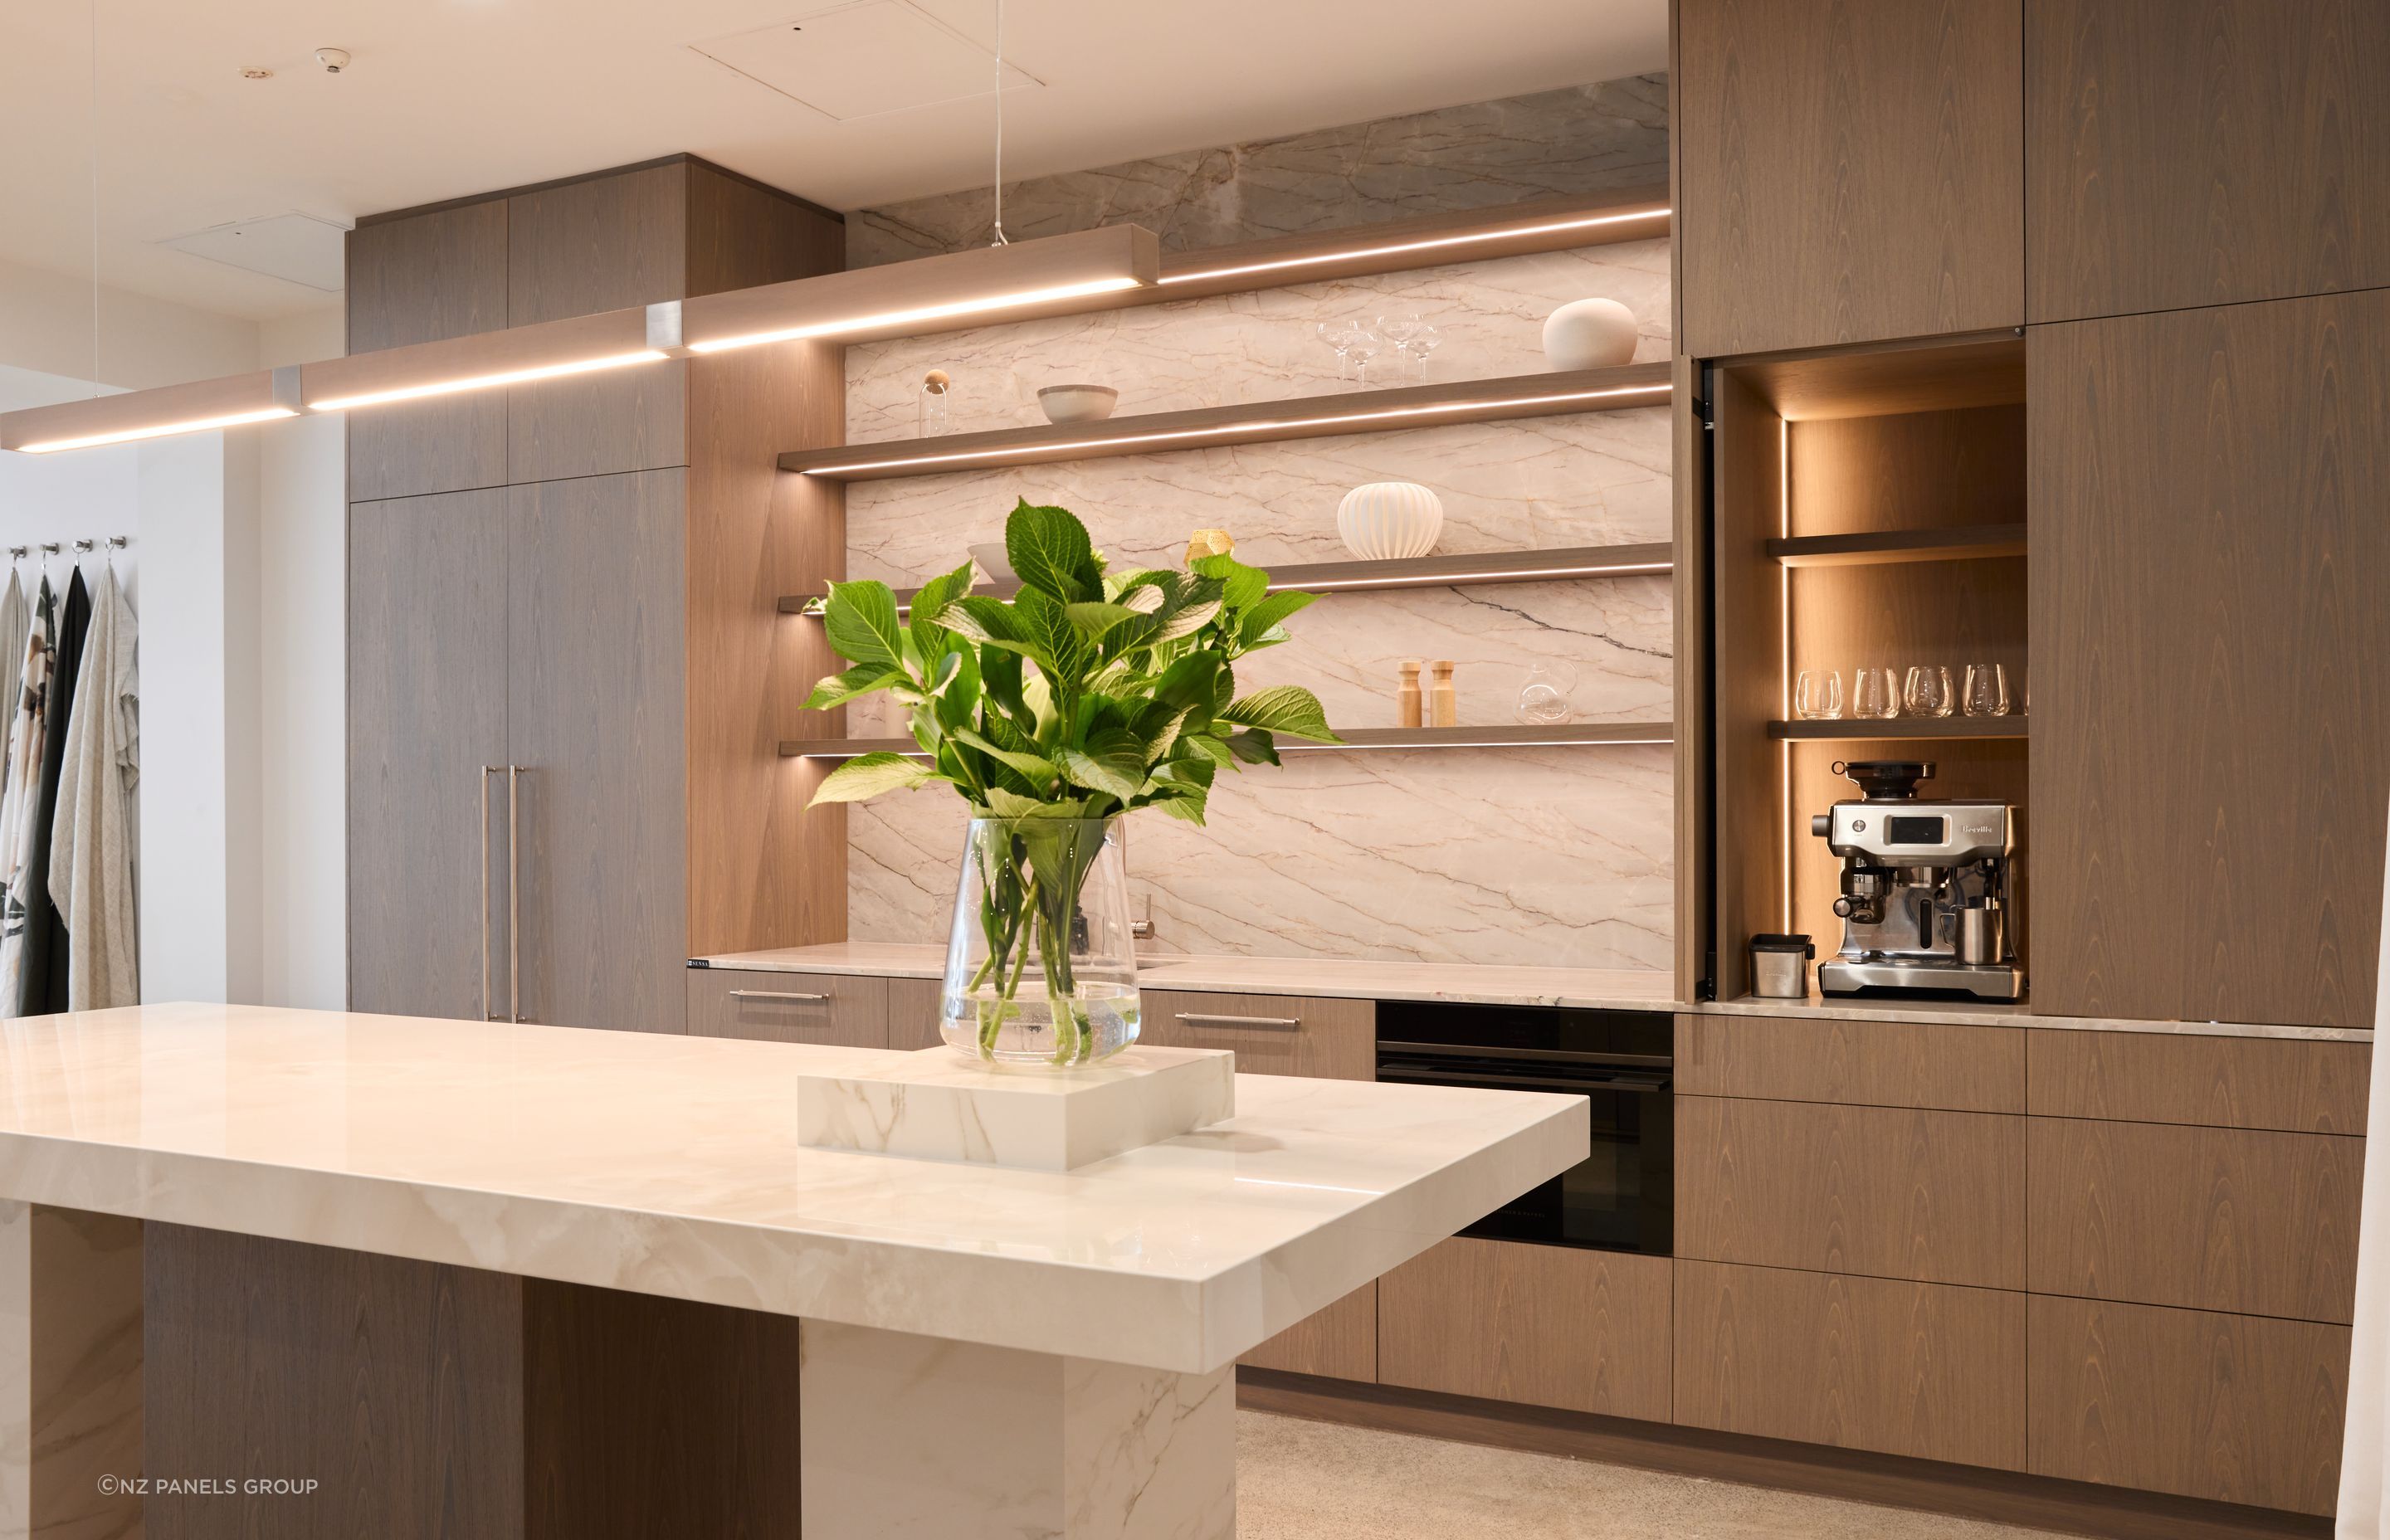 Bestwood's Evoake in a crown cut was chosen for its uniform,  easy-to-work-with layon for this stunning showroom kitchen by designer Georgia Langridge of Modi Design.